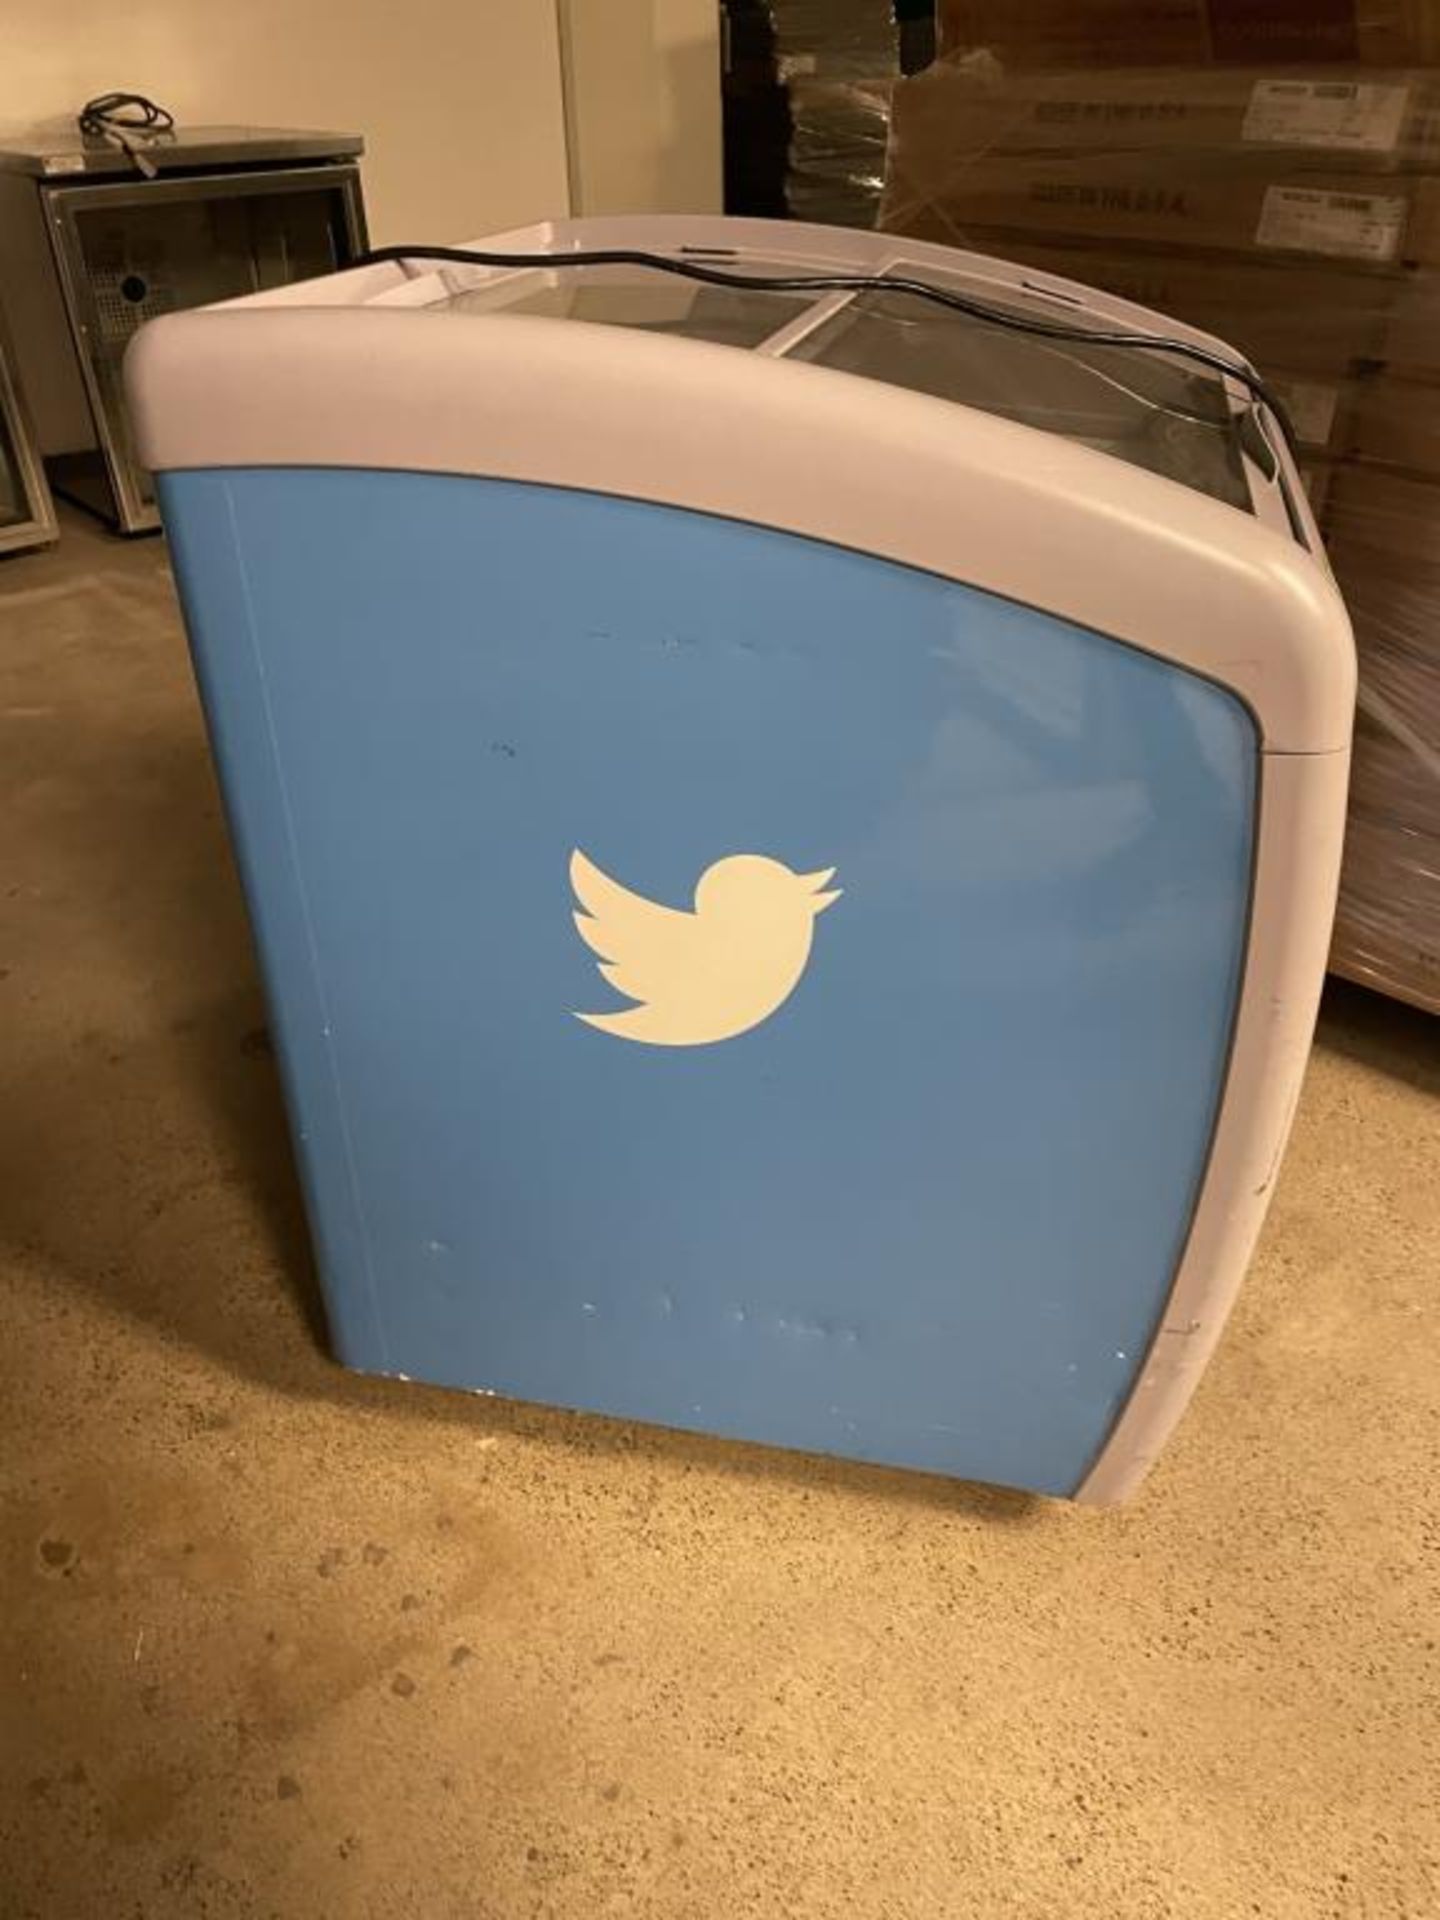 Twitter Branded Curved Top Display Ice Cream Freezer - Image 3 of 11